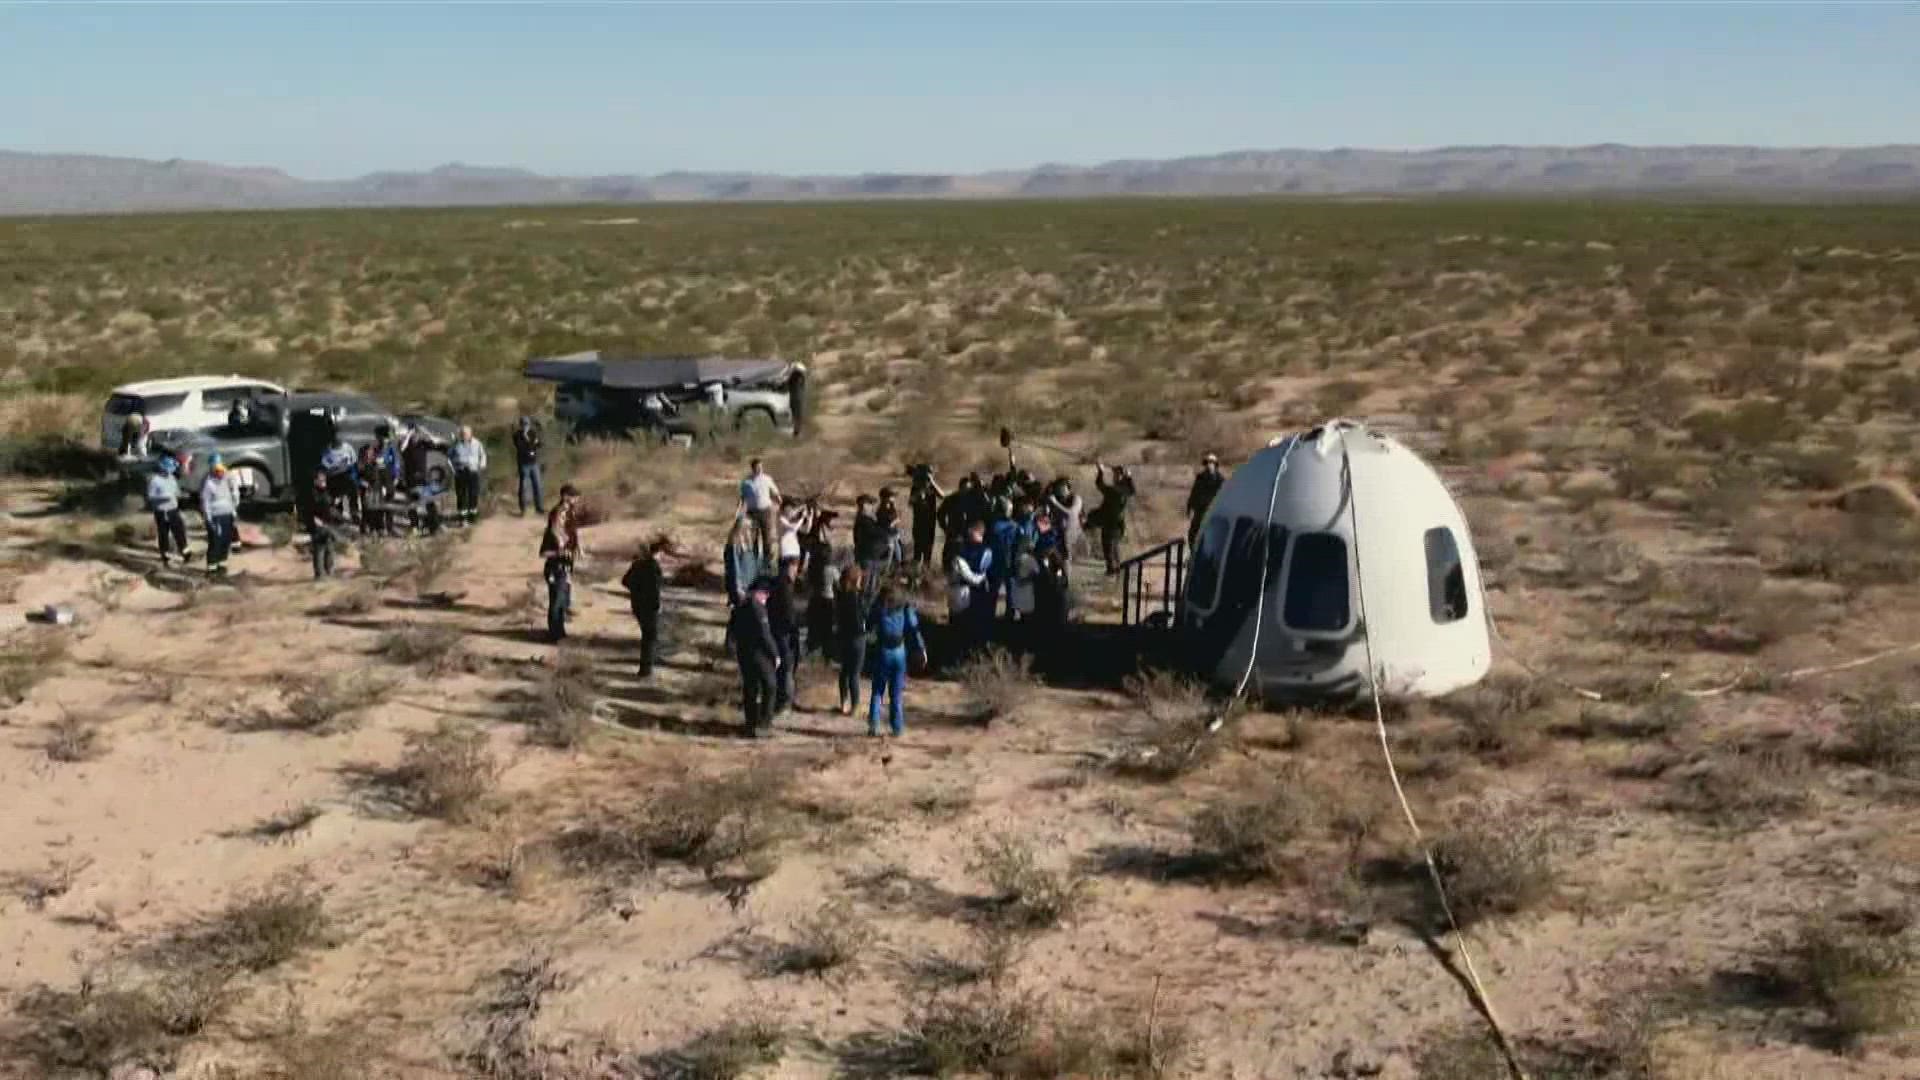 William Shatner and three others went to space Wednesday aboard Blue Origin's capsule. Jeff Bezos was there to each of them as they emerged.